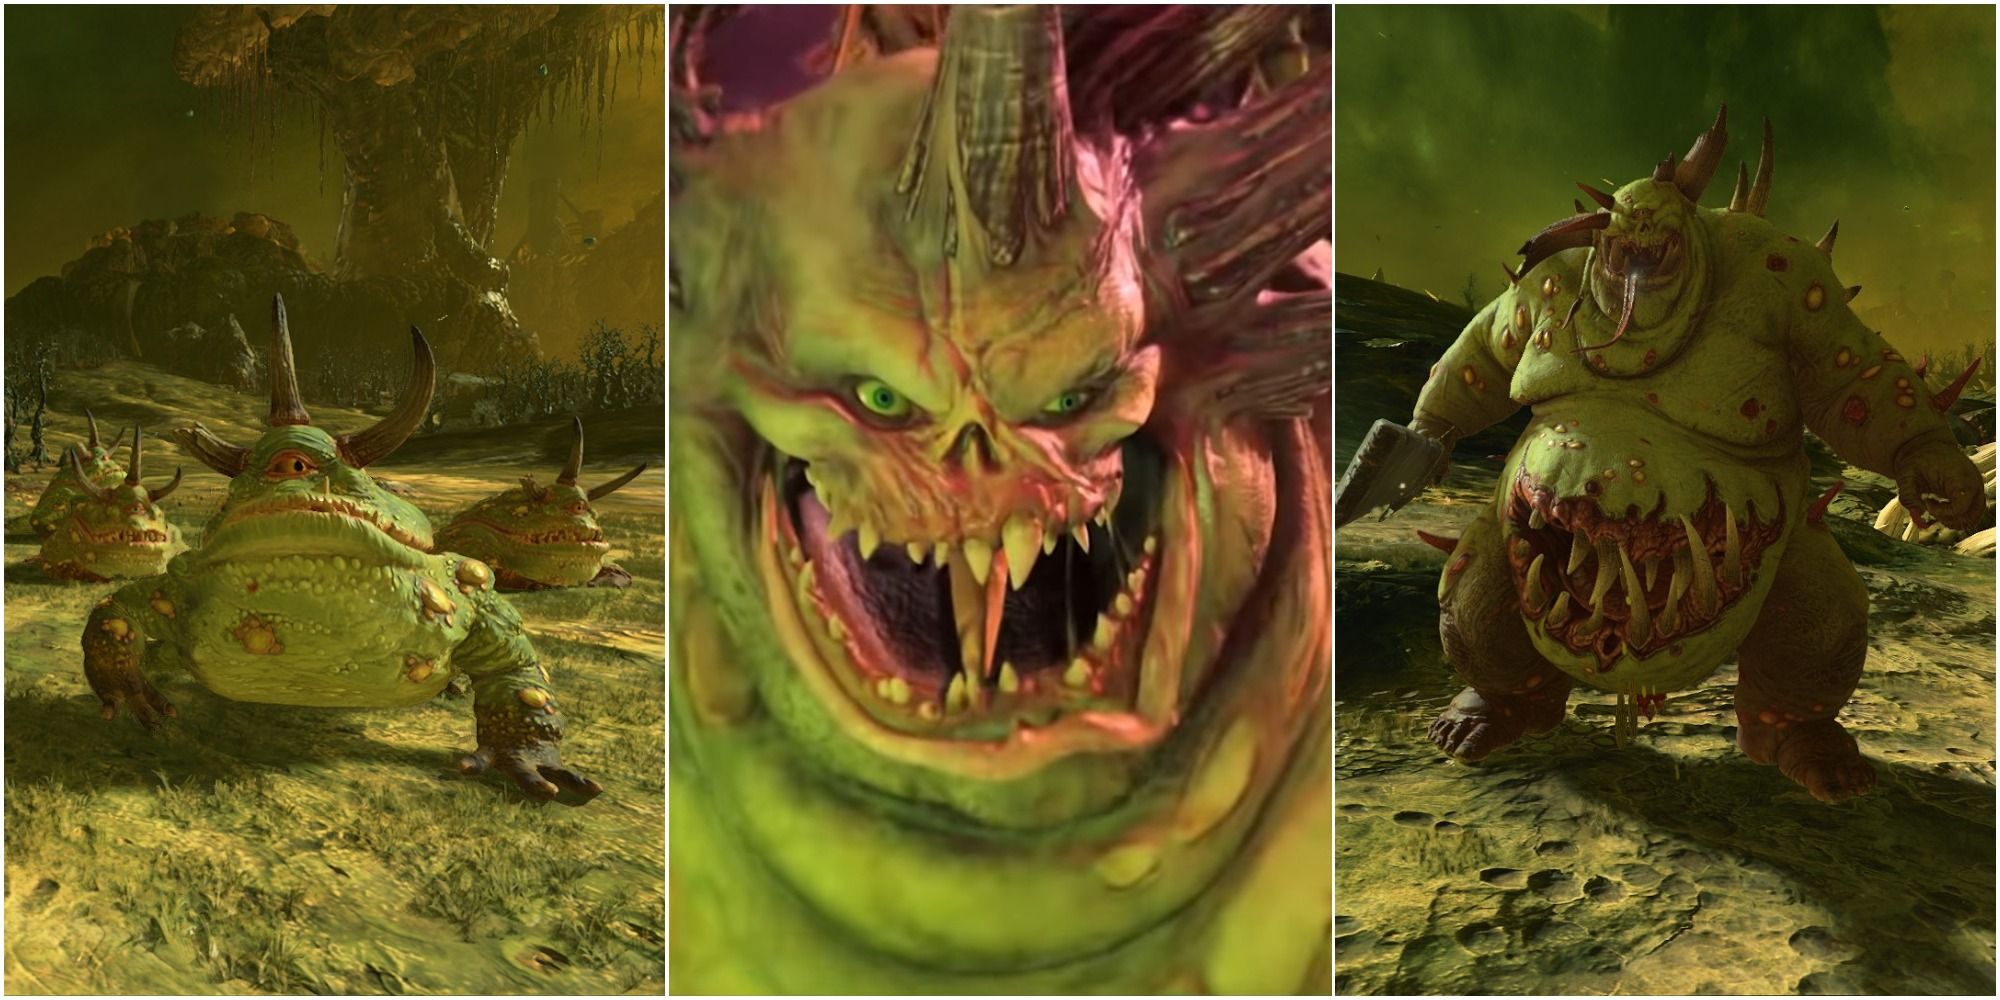 Total War Warhammer 3 Nurgle Army showing toads, Nurgle's legendary lord, and the Great Unclean One